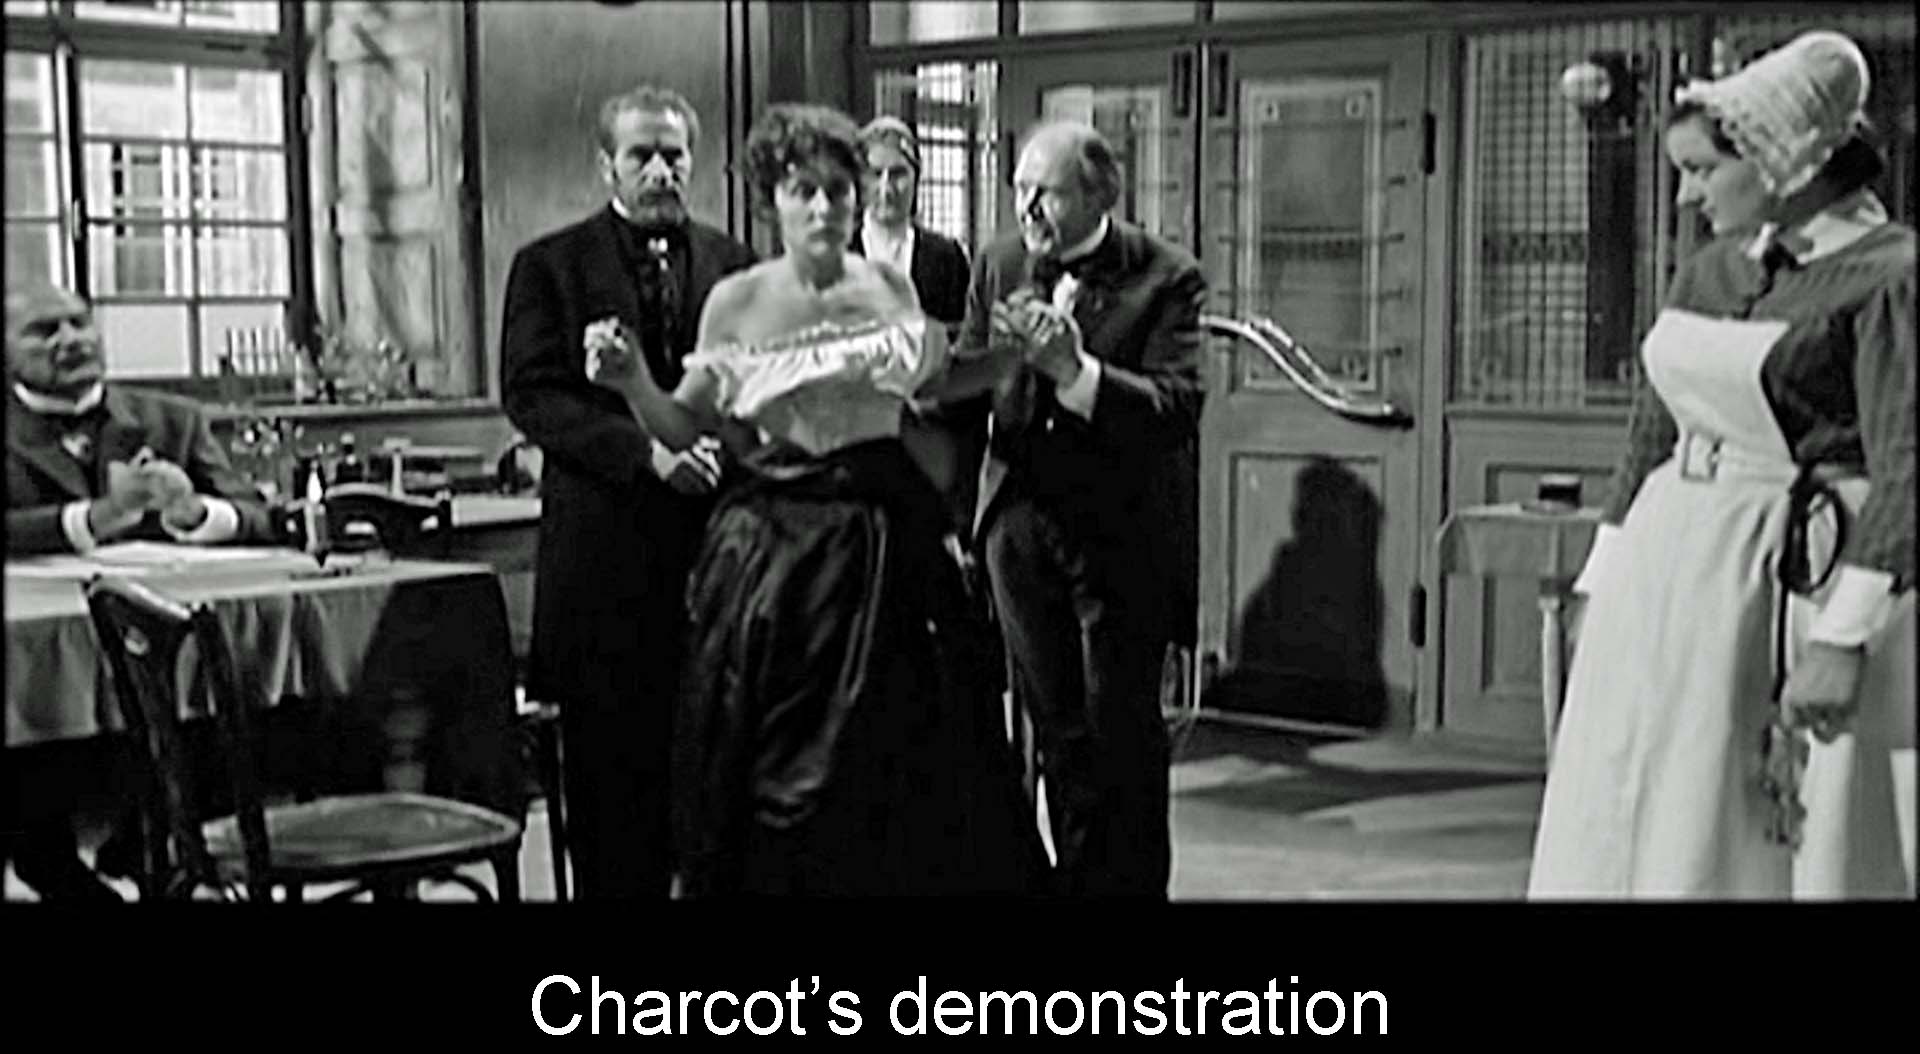 Charcot's demonstration